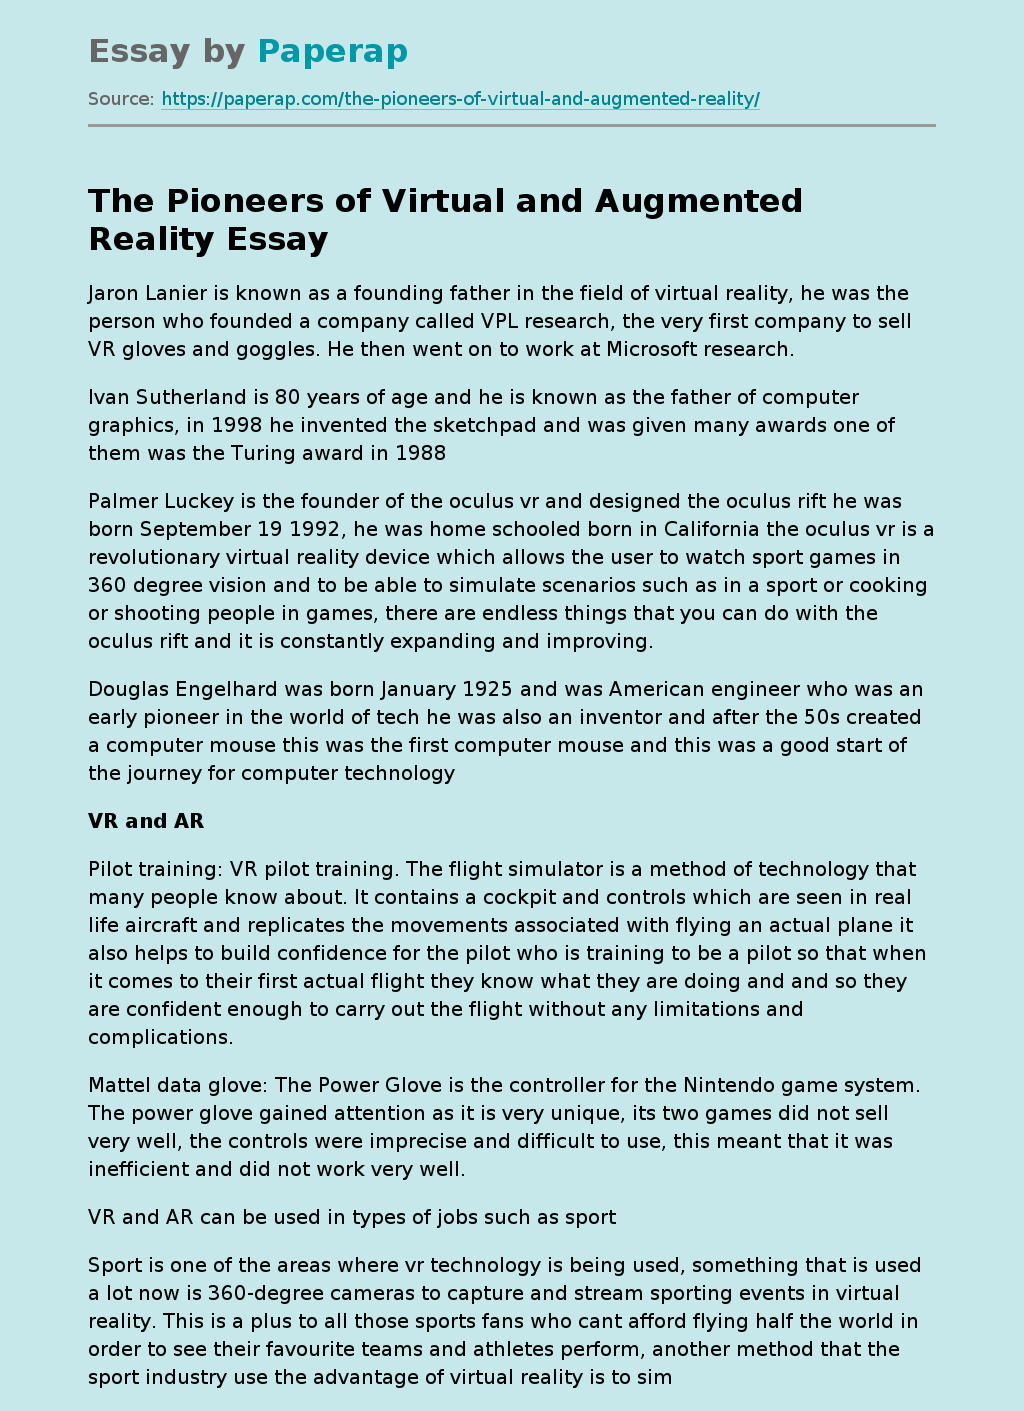 The Pioneers of Virtual and Augmented Reality